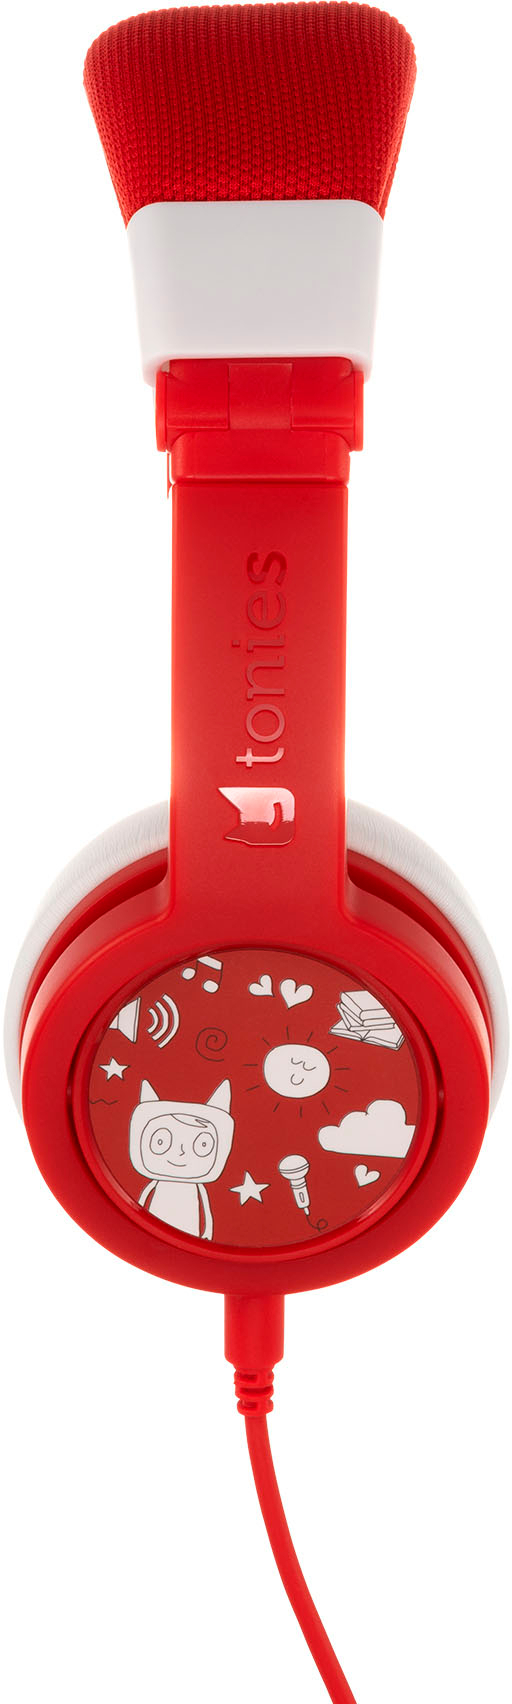 Left View: Tonies - Wired On-Ear Headphones - Red